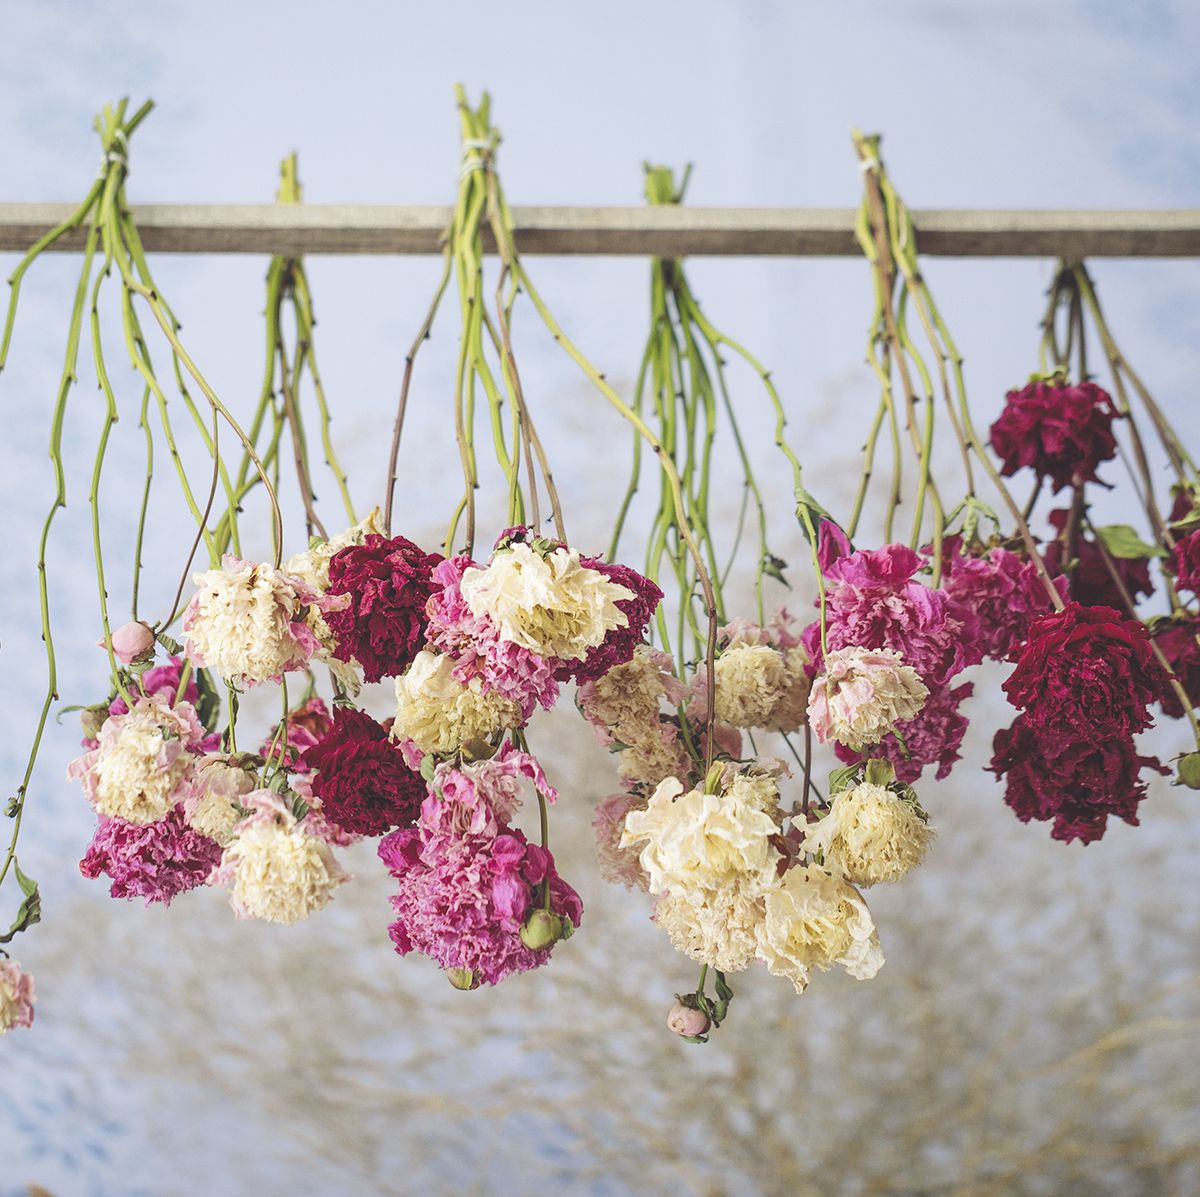 How to Frame Dried Flowers, According to a Pro Florist